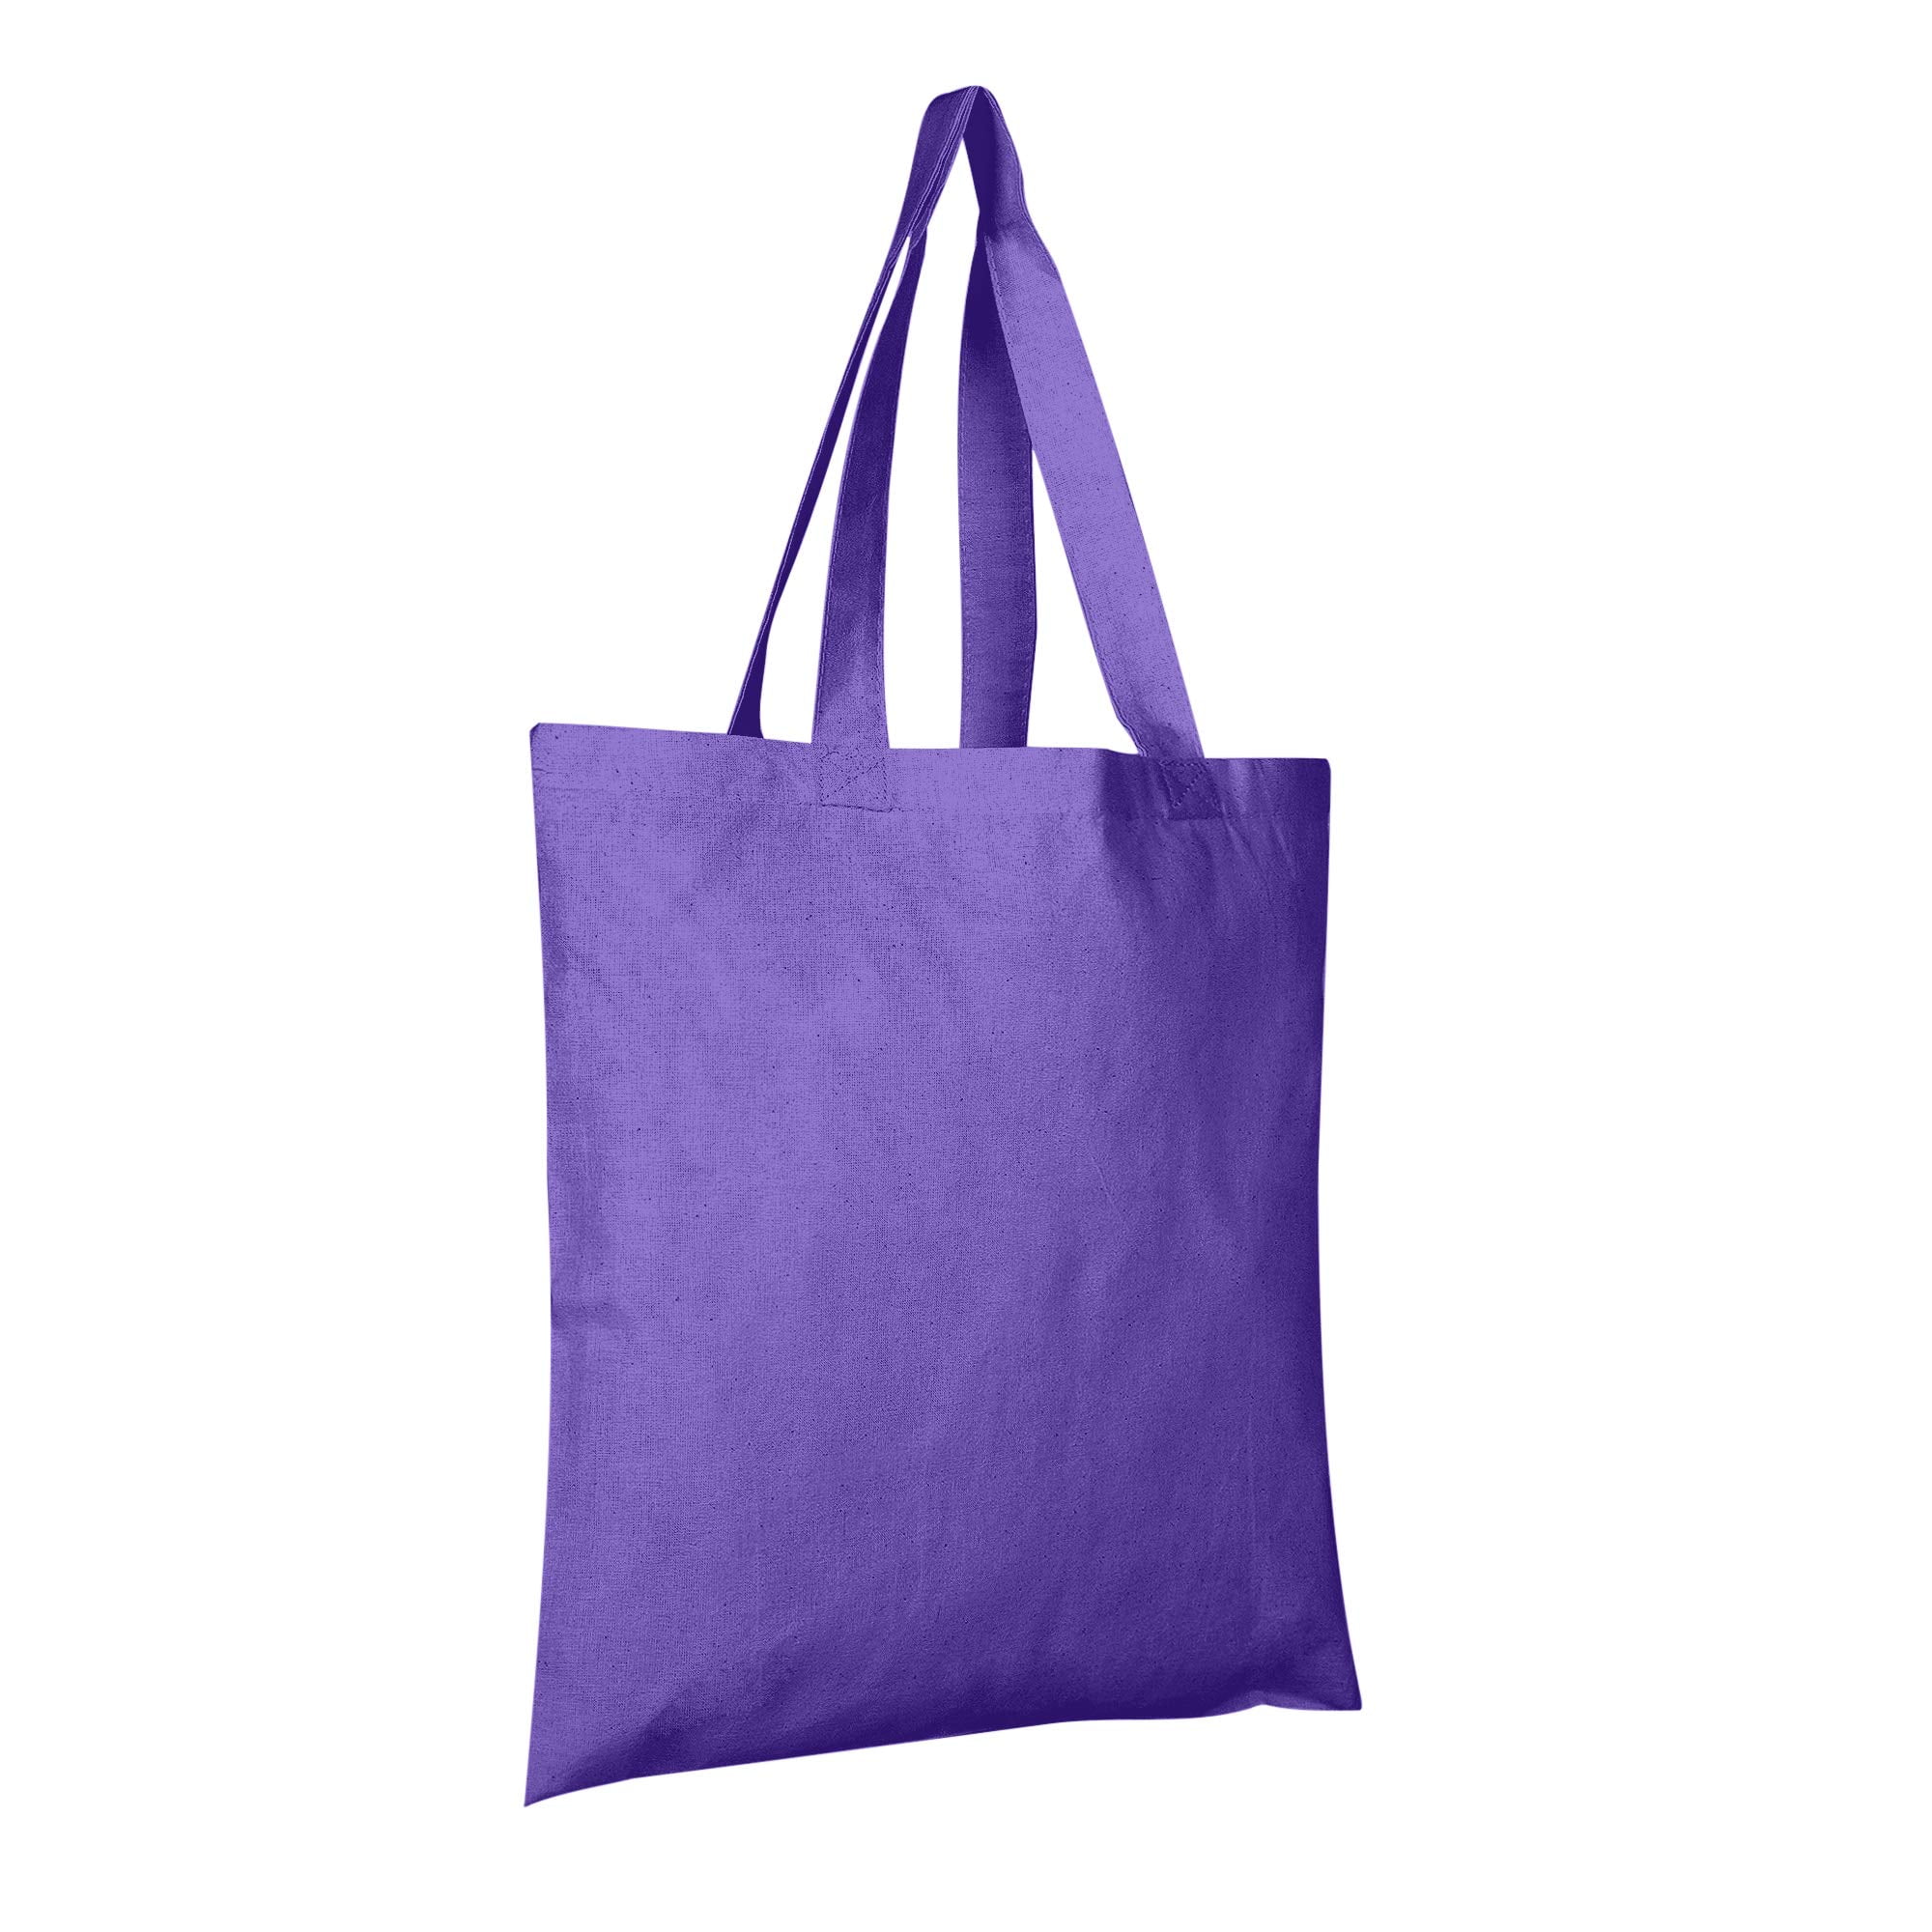 Grocery Bags Wholesale: Cotton Spirit - MNC Bags New York